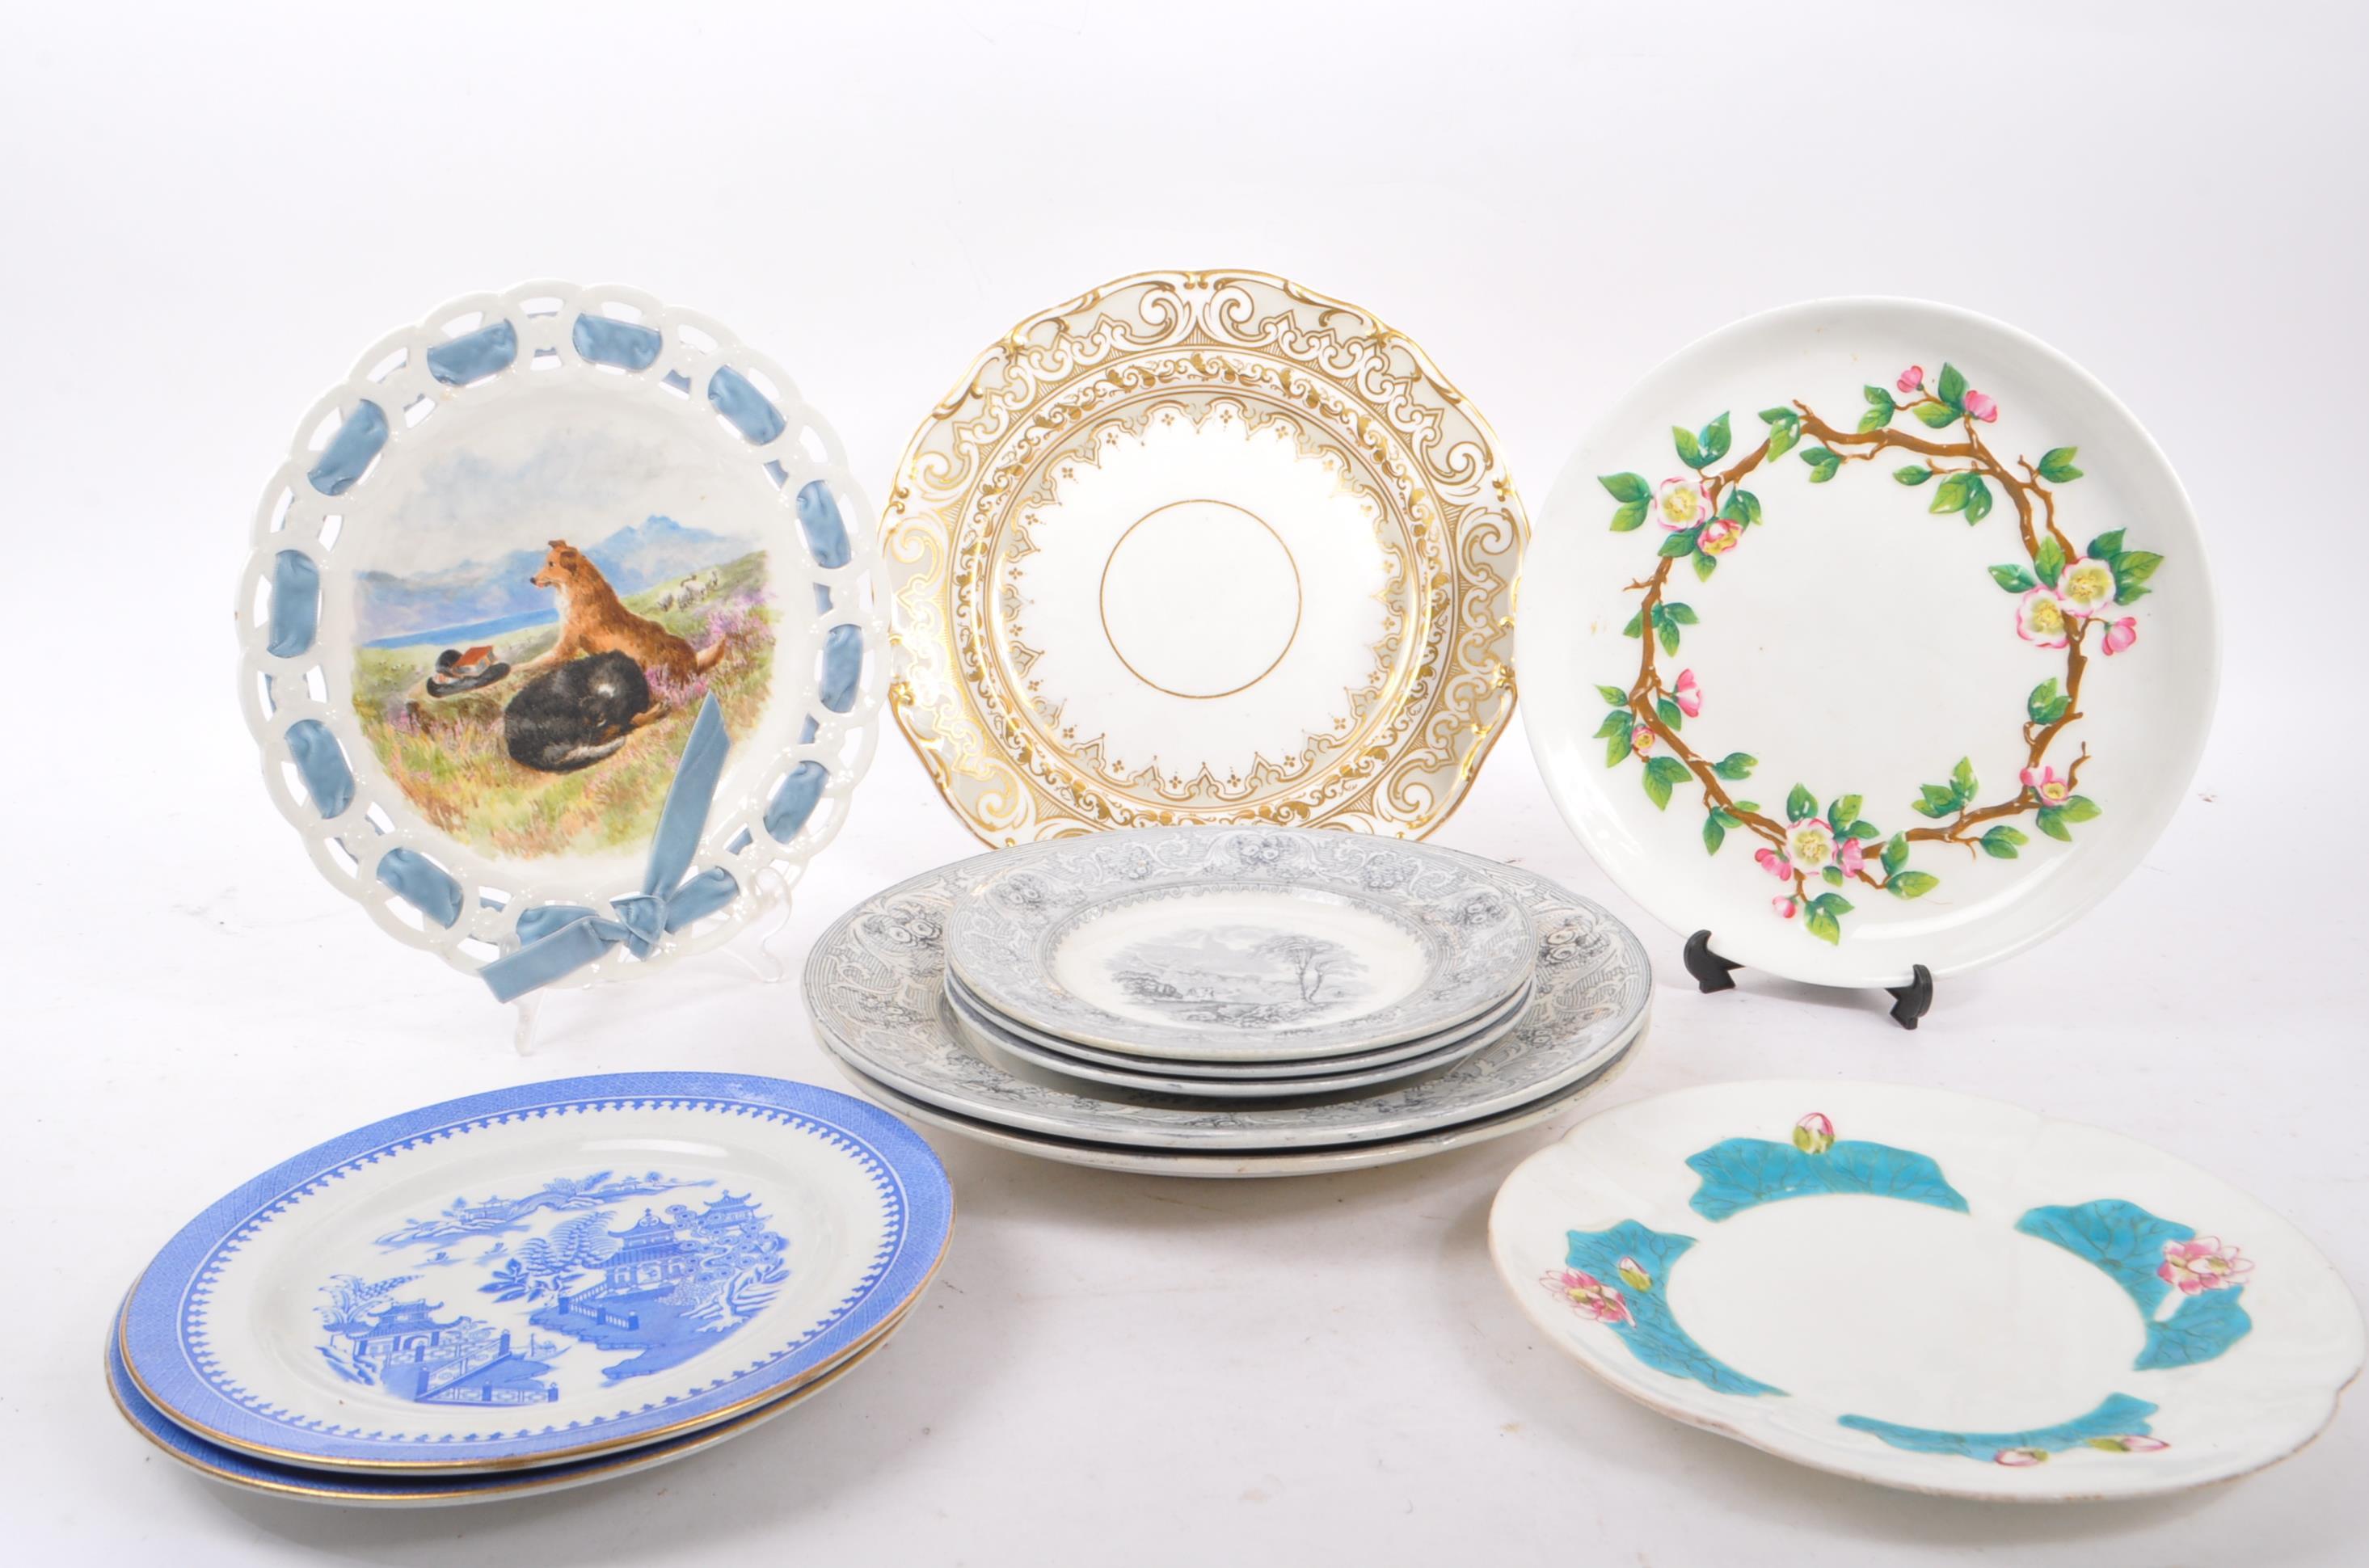 COLLECTION OF 19TH CENTURY CABINET DISPLAY PLATES / DISHES